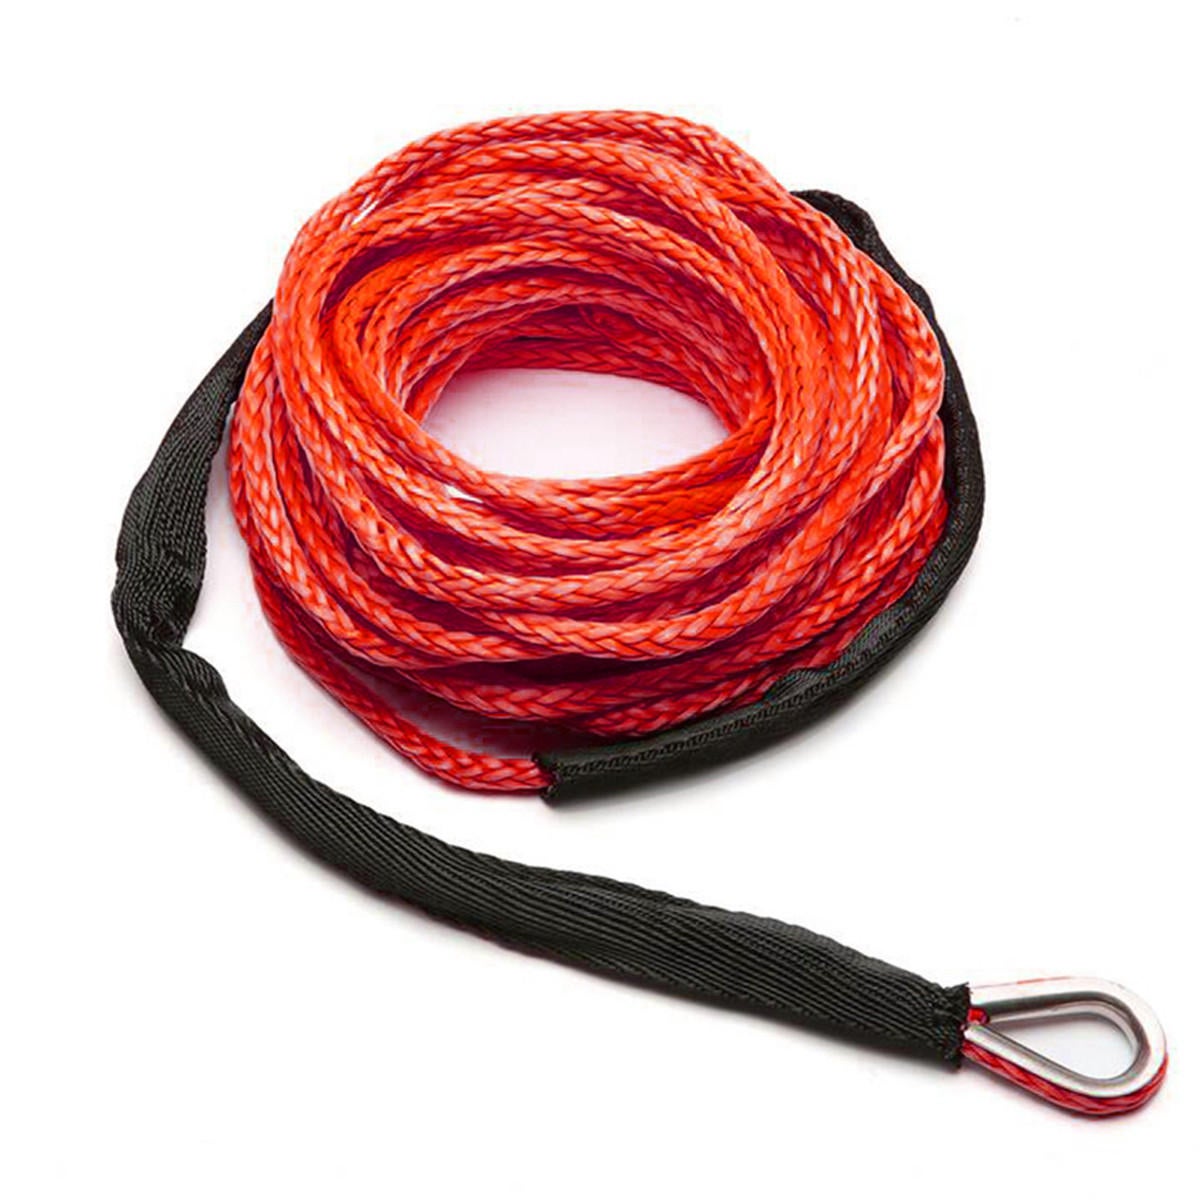 15x5mm Emergency Safety Towing Ropes Cable Wire Winch Rope with Sheath